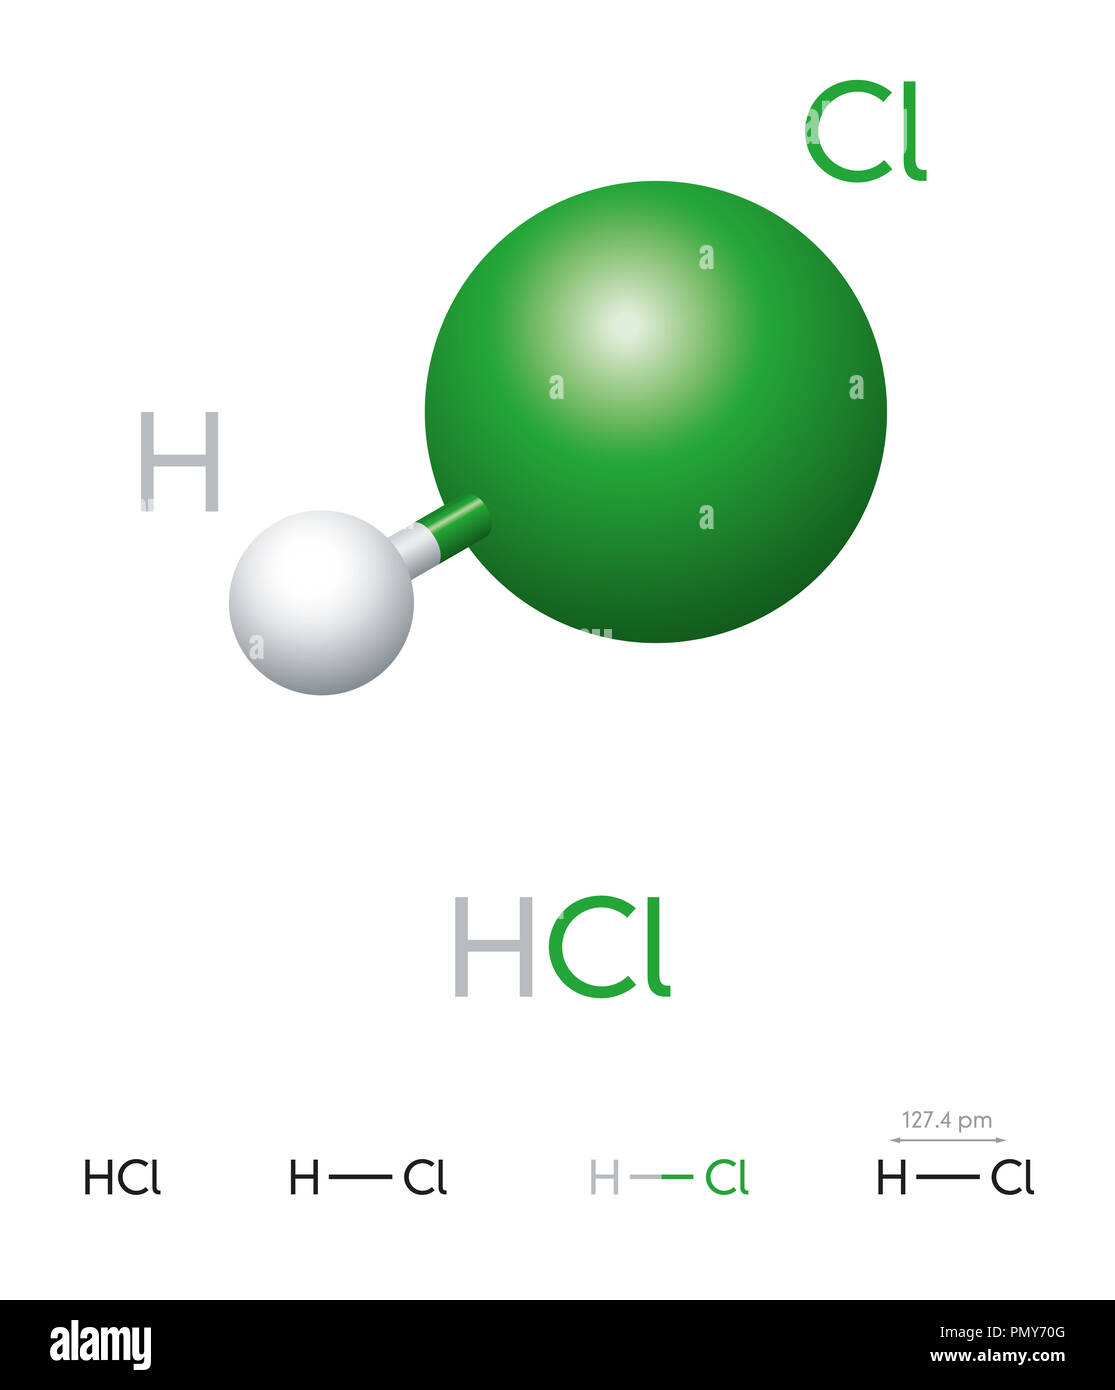 HCl. Hydrogen chloride. Molecule model, chemical formula, ball-and-stick model, geometric structure and structural formula. Hydrogen halide. Stock Photo